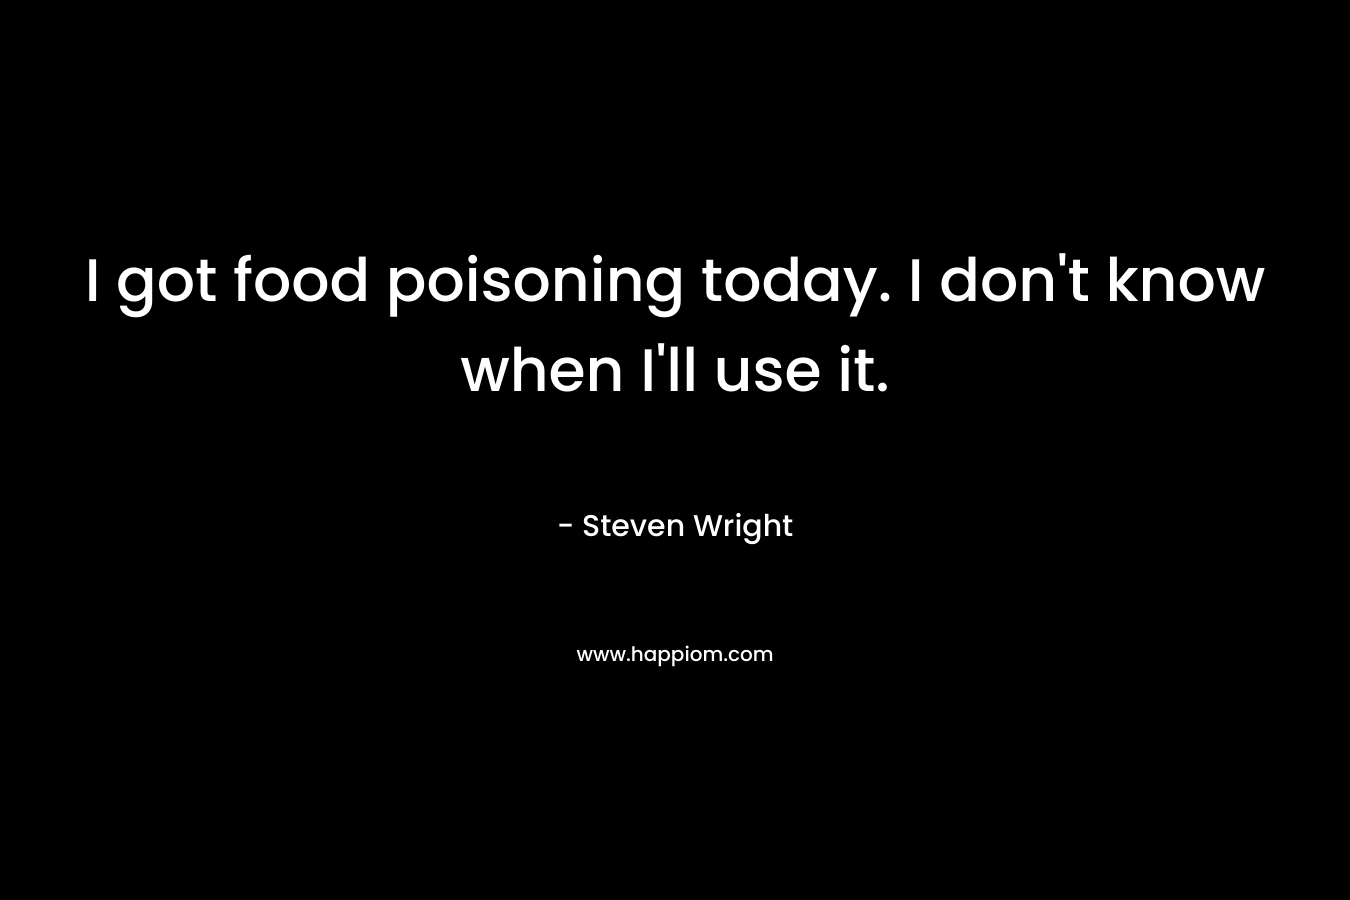 I got food poisoning today. I don’t know when I’ll use it. – Steven Wright